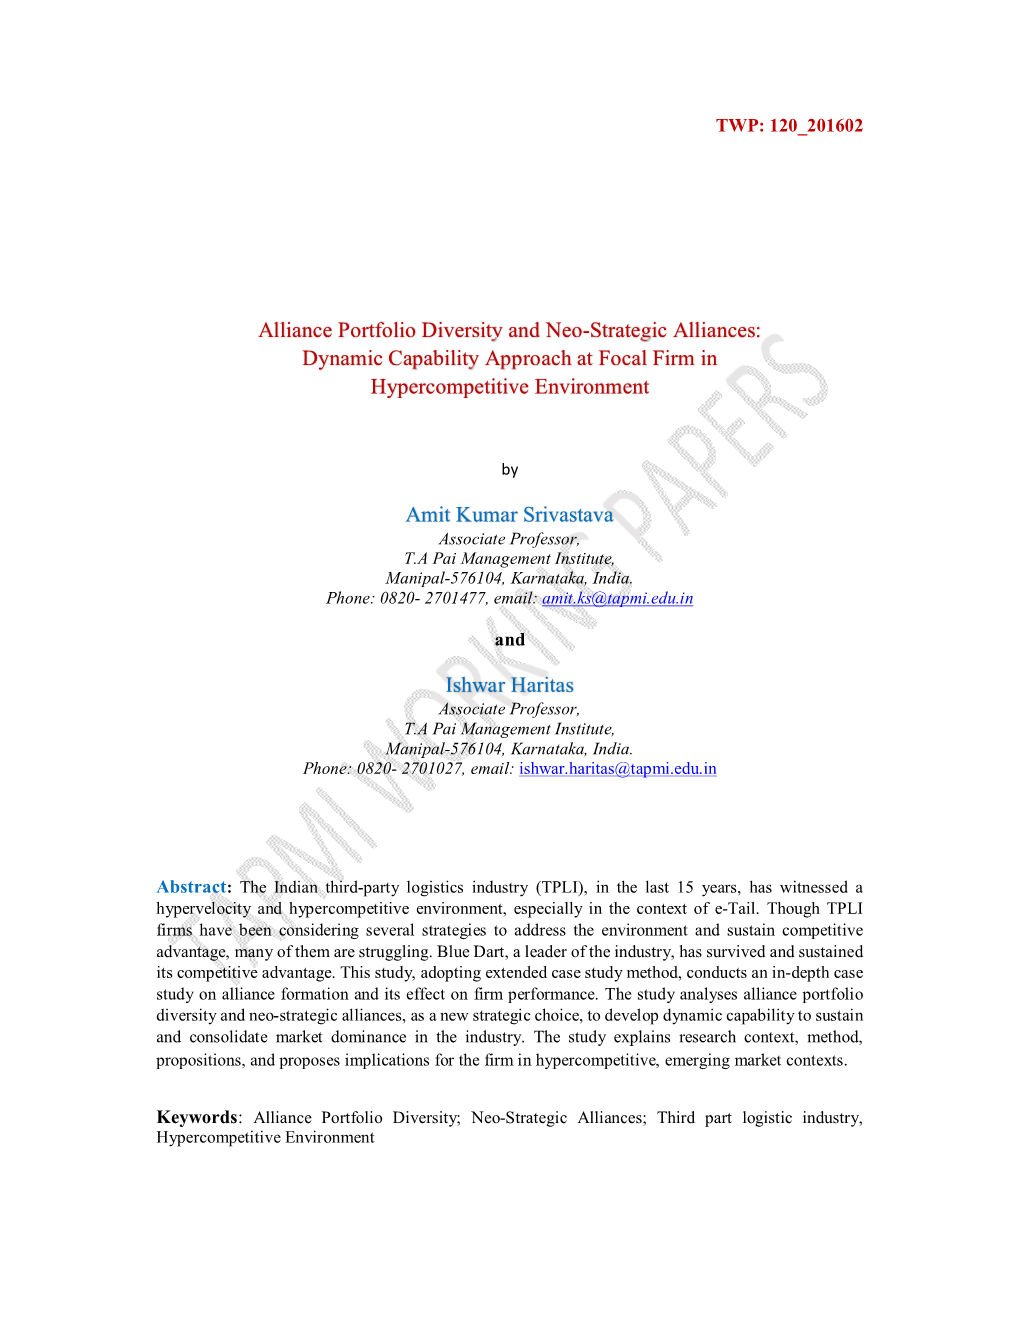 Alliance Portfolio Diversity and Neo-Strategic Alliances: Dynamic Capability Approach at Focal Firm in Hypercompetitive Environment